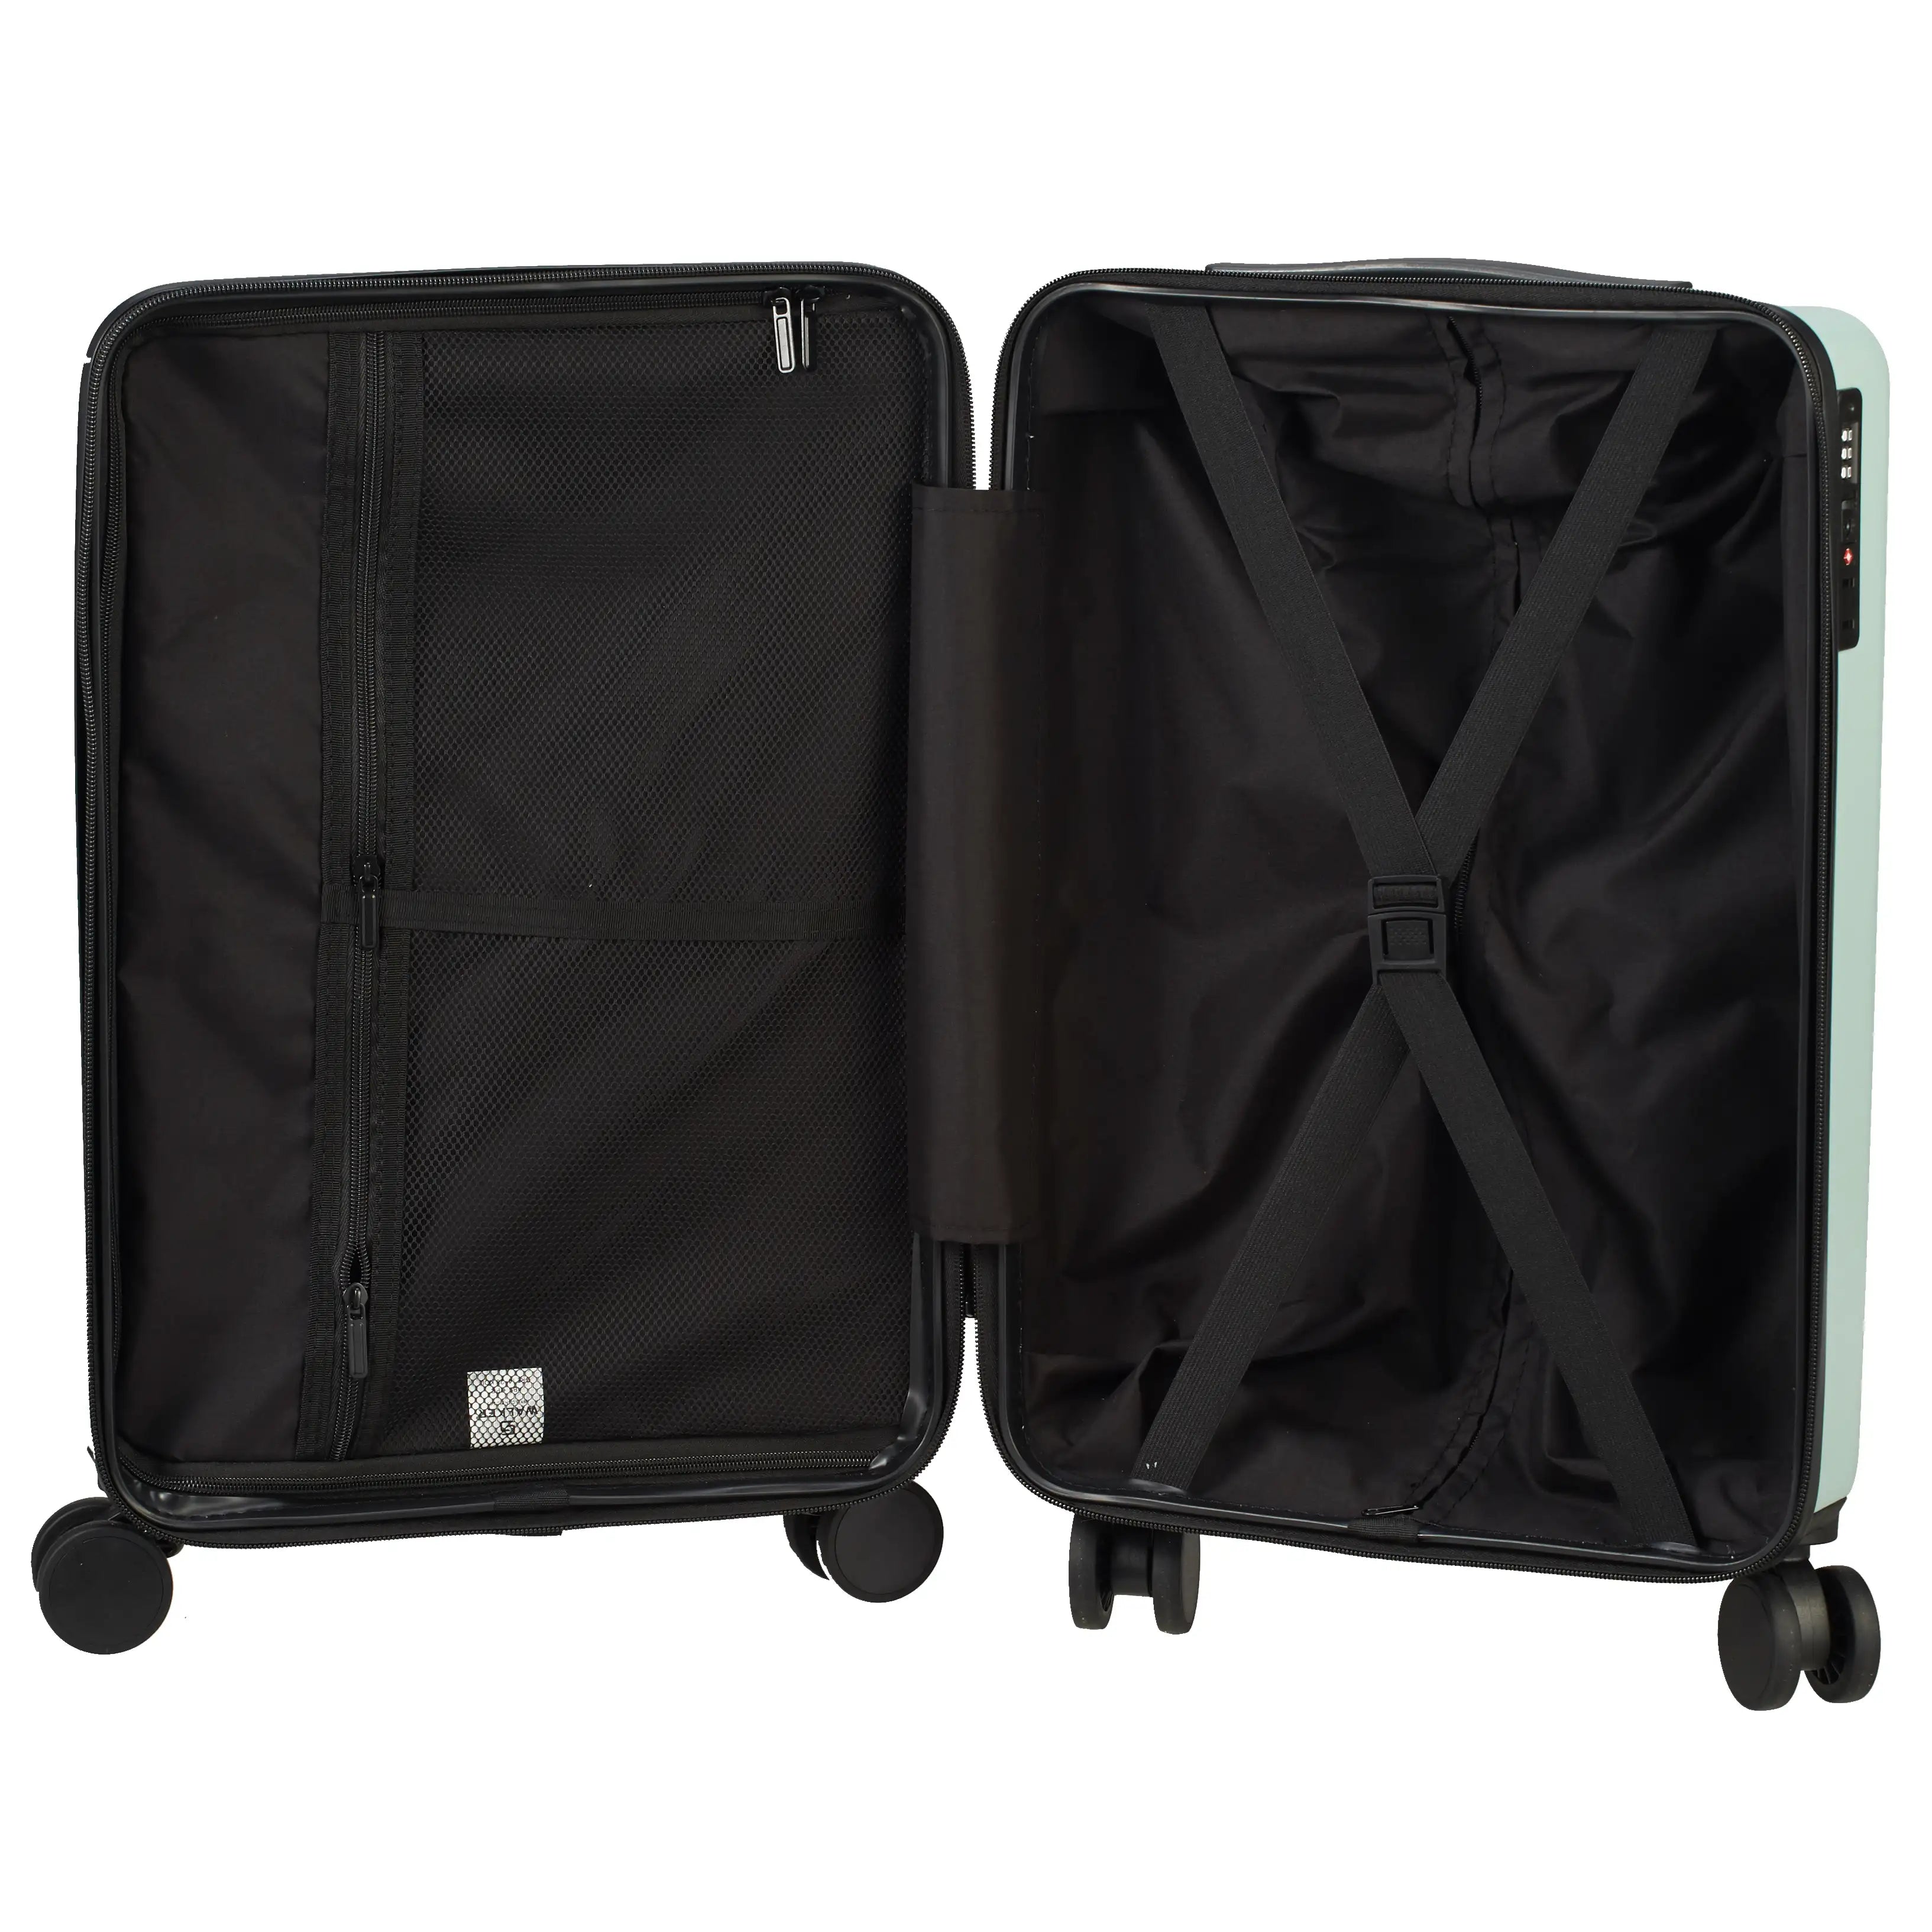 Valise cabine 4 roues Walker Florida 55 cm - Anthracite